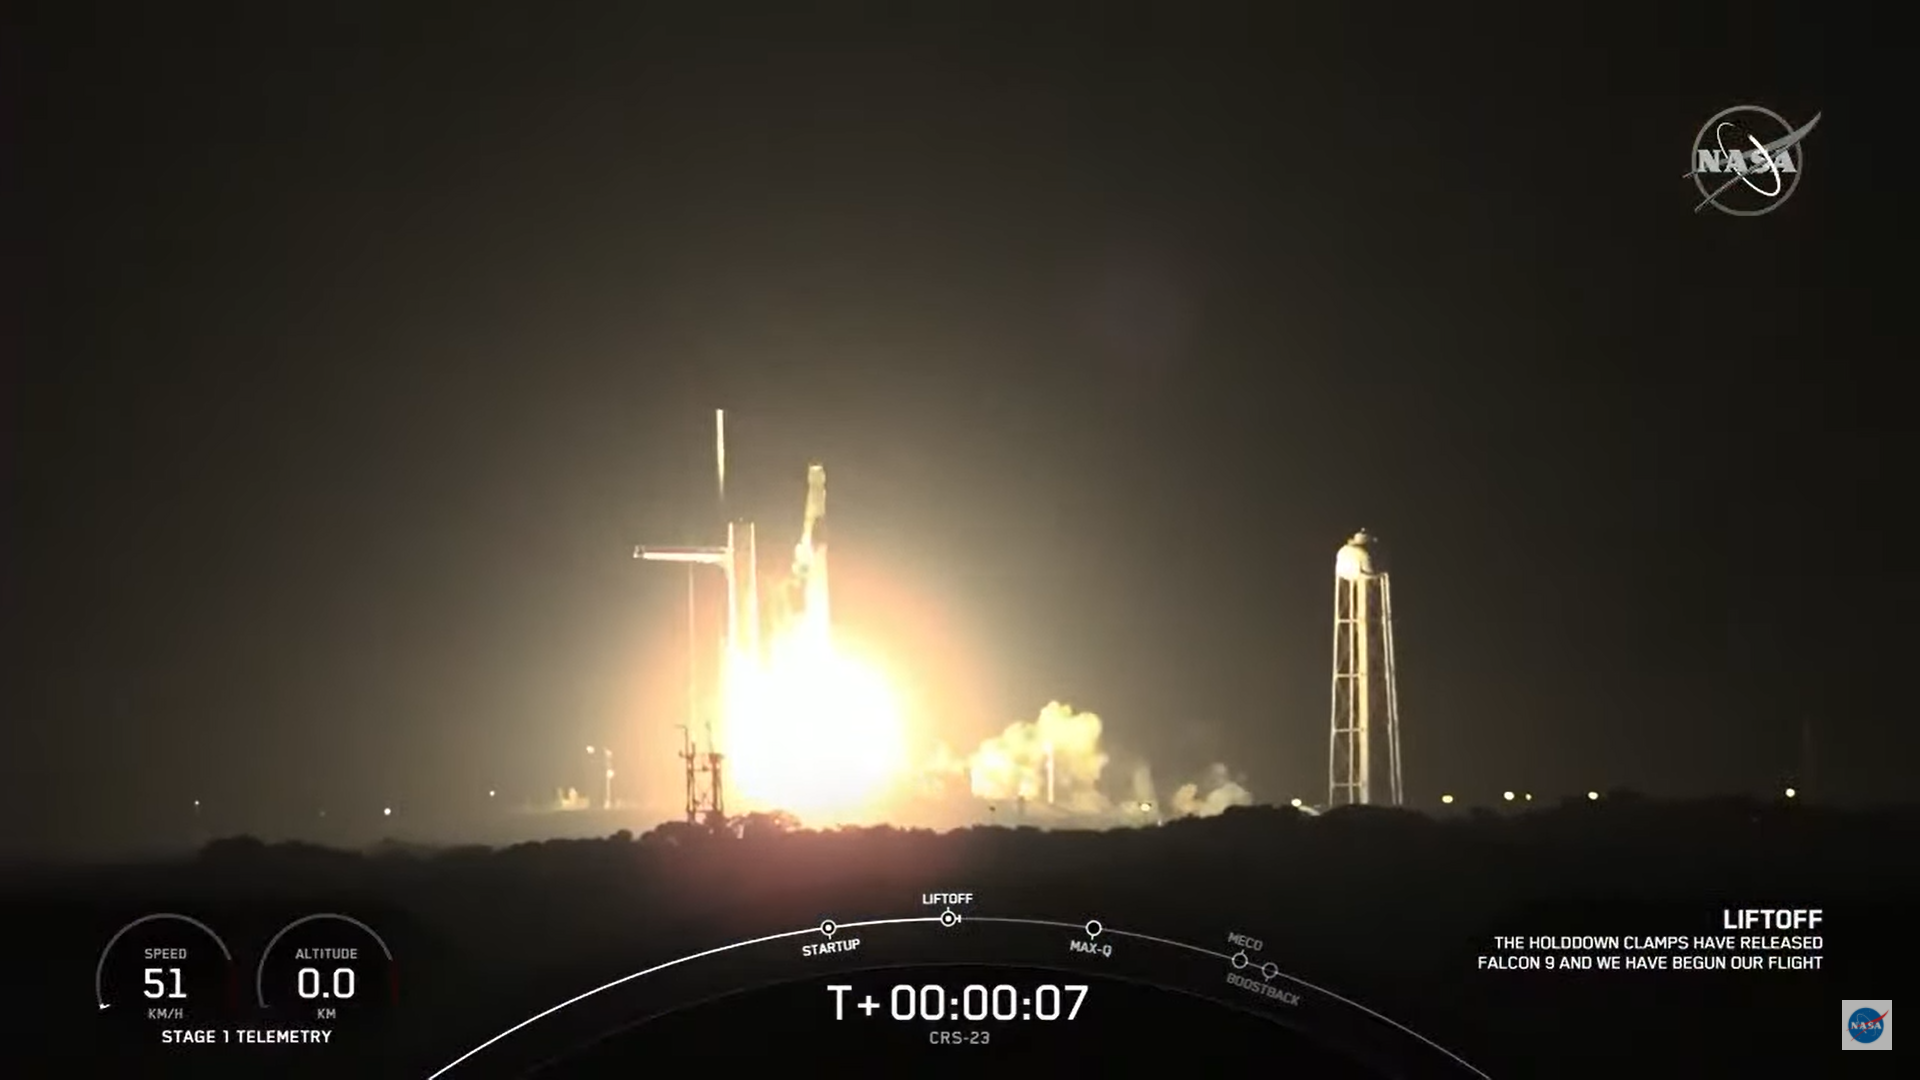 Launch of SpaceX Falcon 9 carrying cube satellites Maya-3 and Maya-4 to the International Space Station Photo captured via NASA Live stream